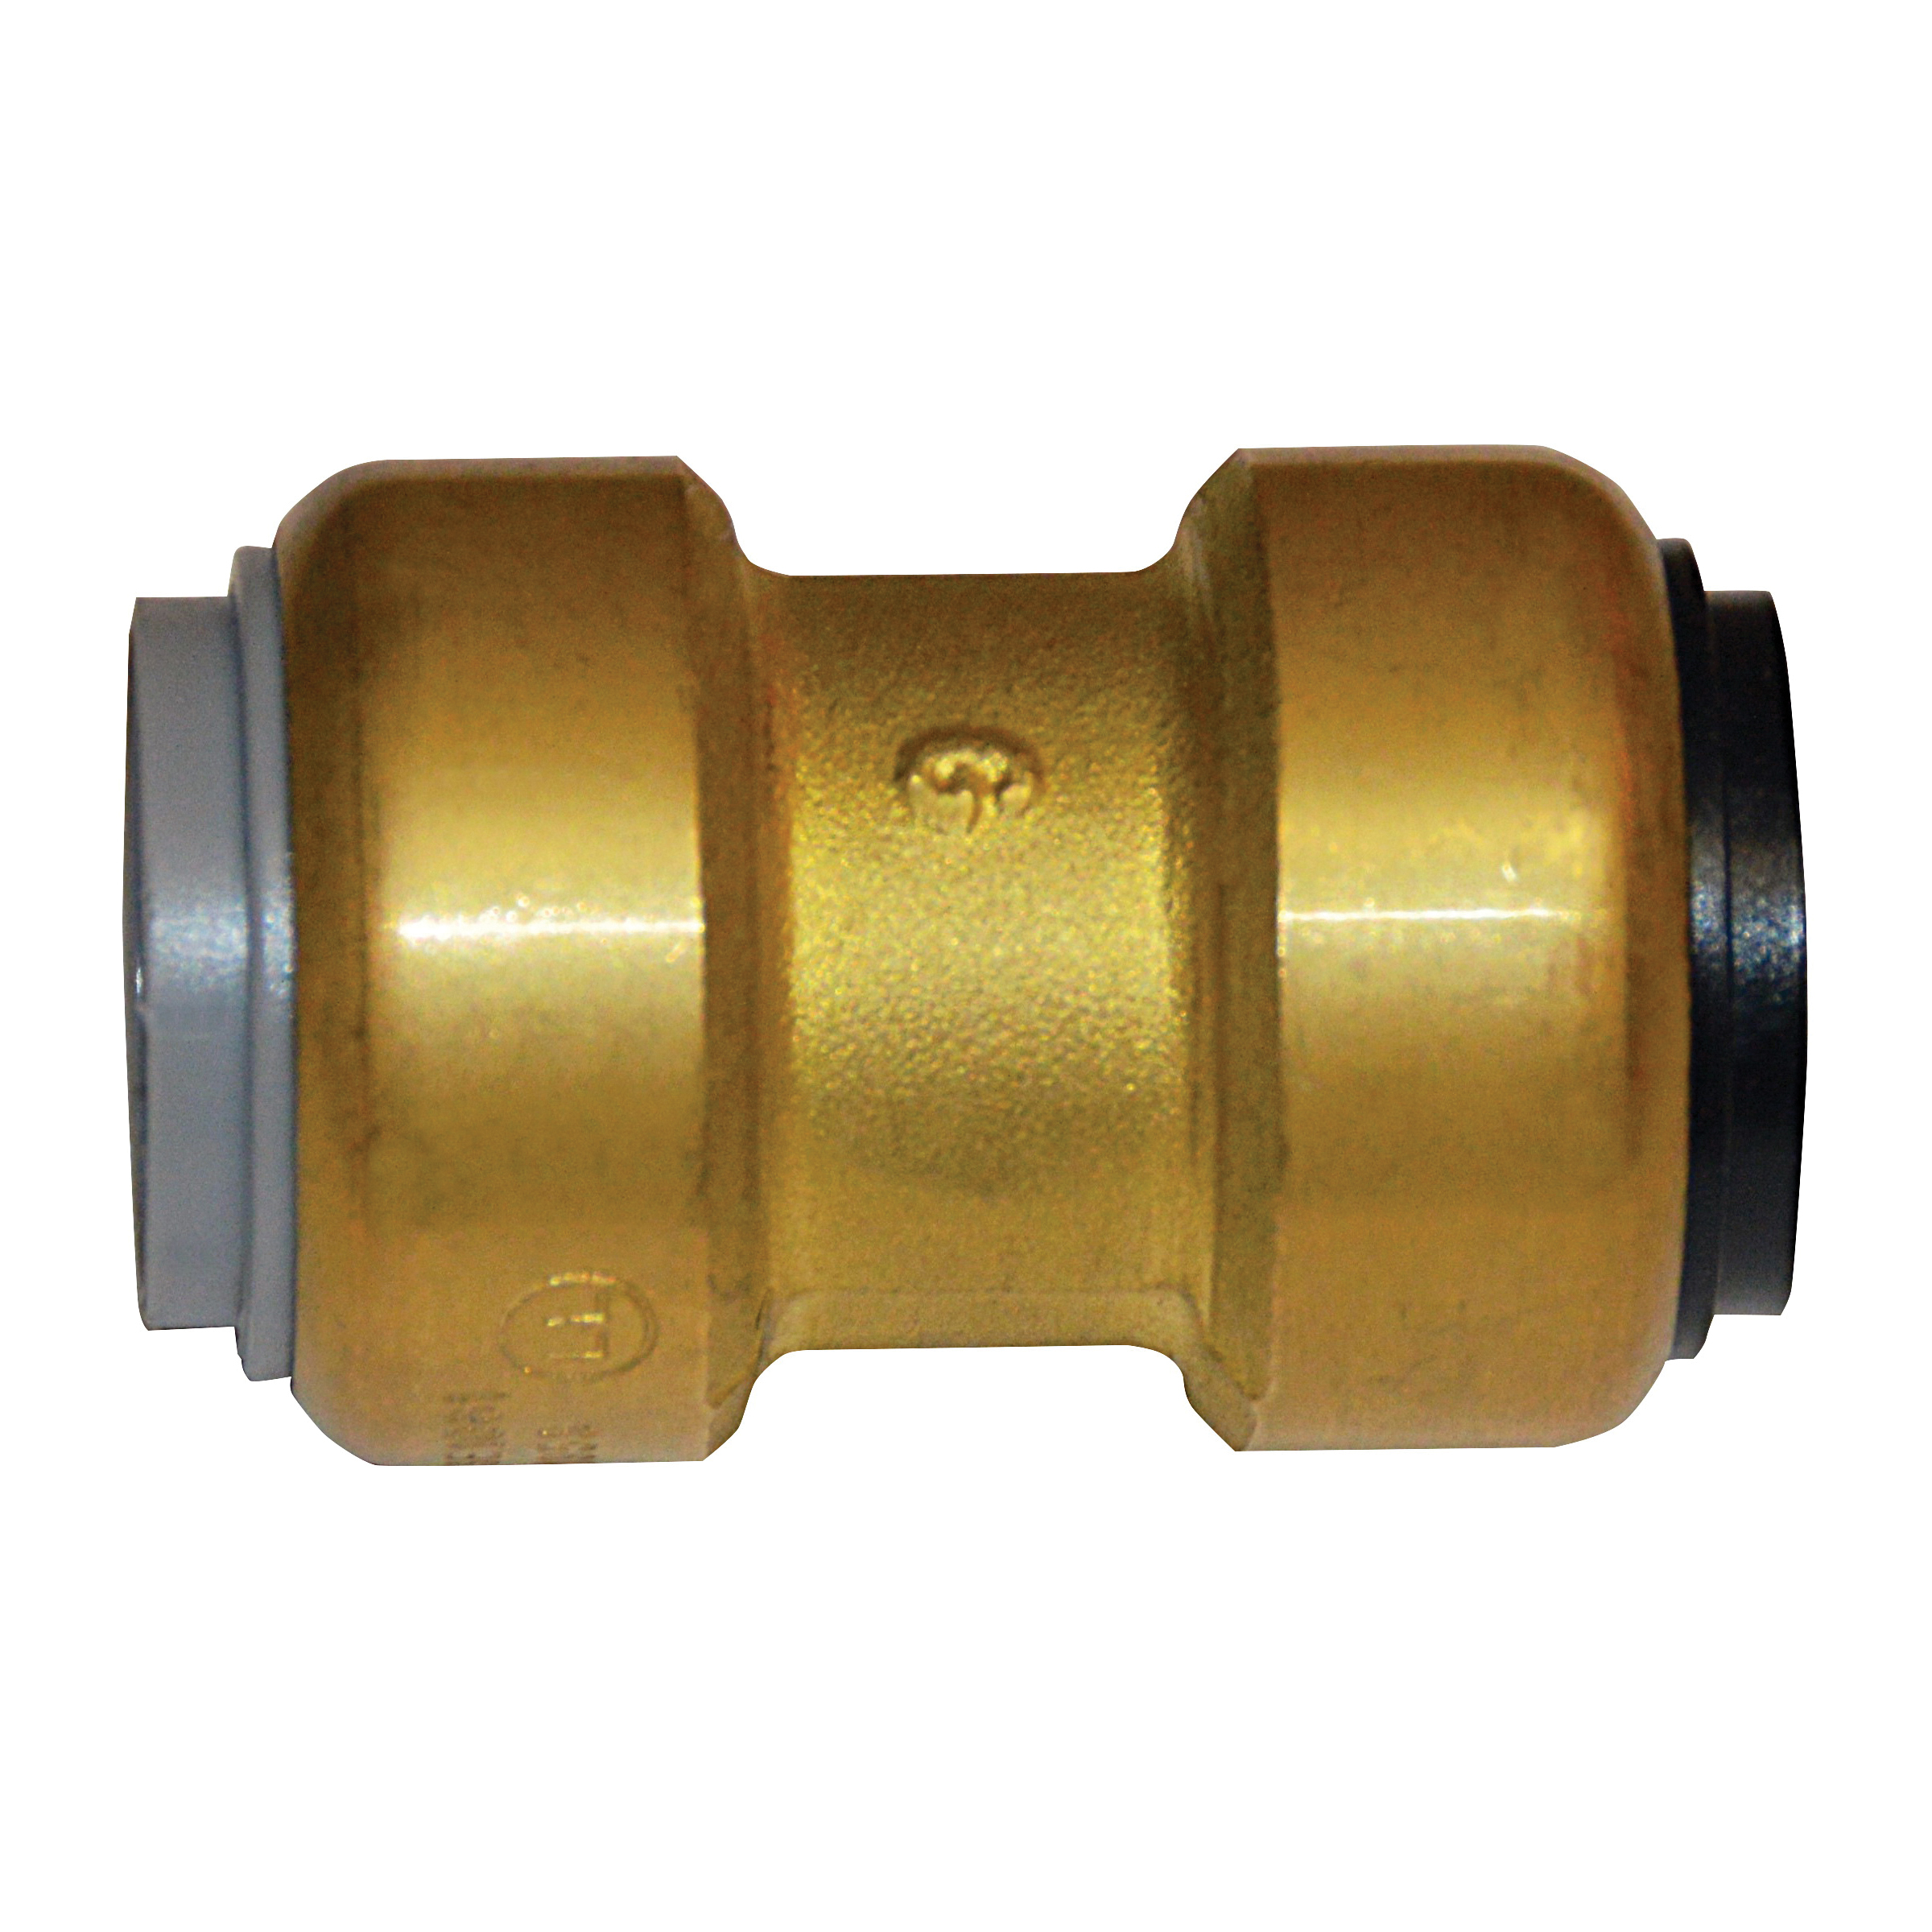 EPC TECTITE™ 10155455 200-PB Push Transition Coupling With Polybutylene Stop, 3/4 in Nominal, C x C End Style, Brass